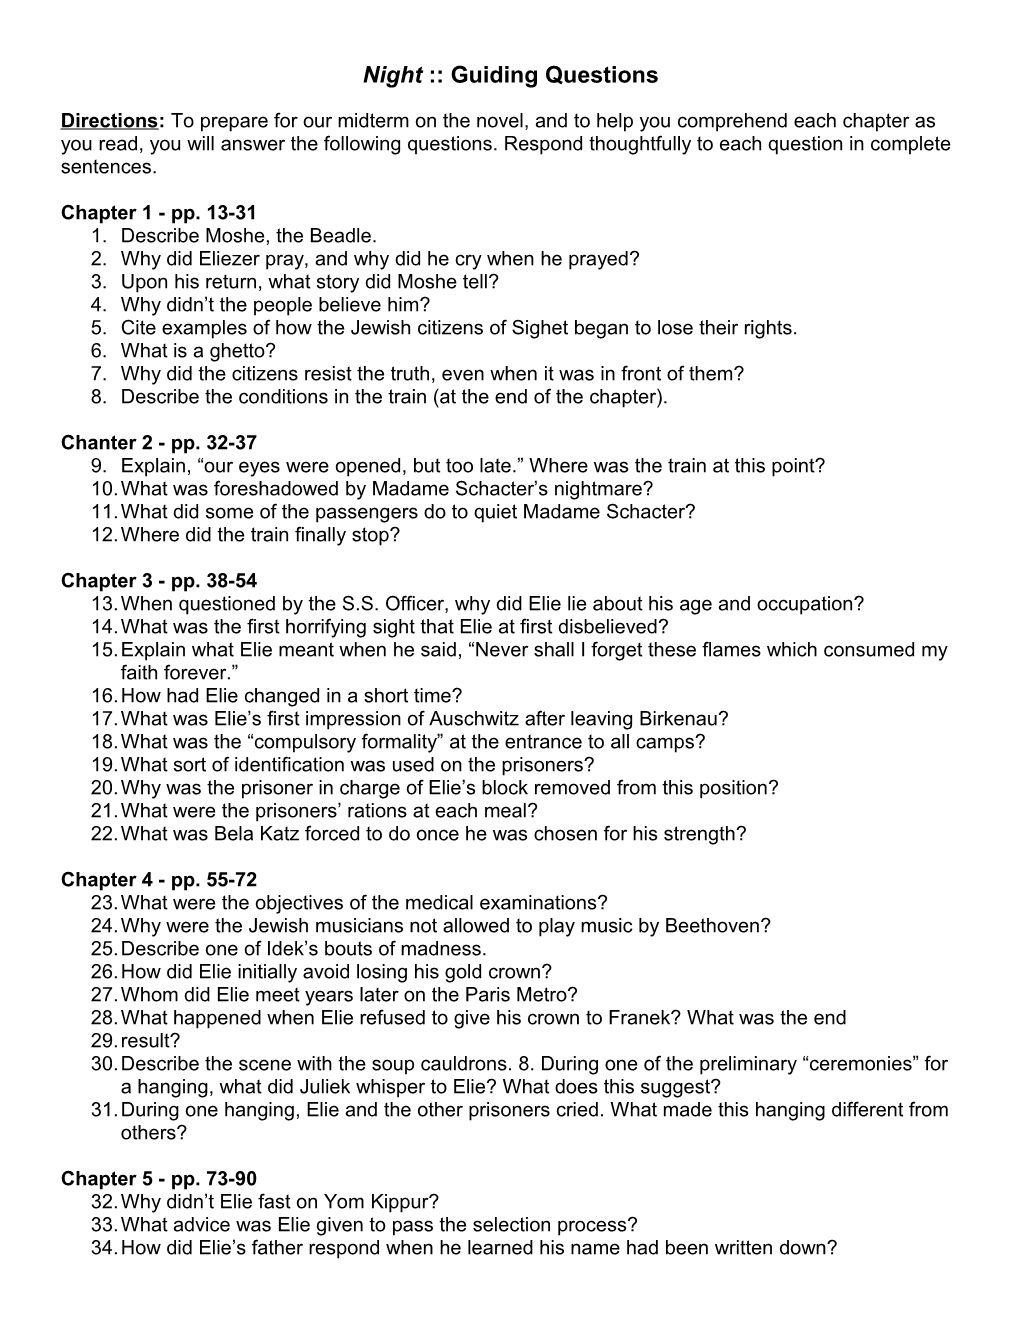 Night Chapter Questions s1